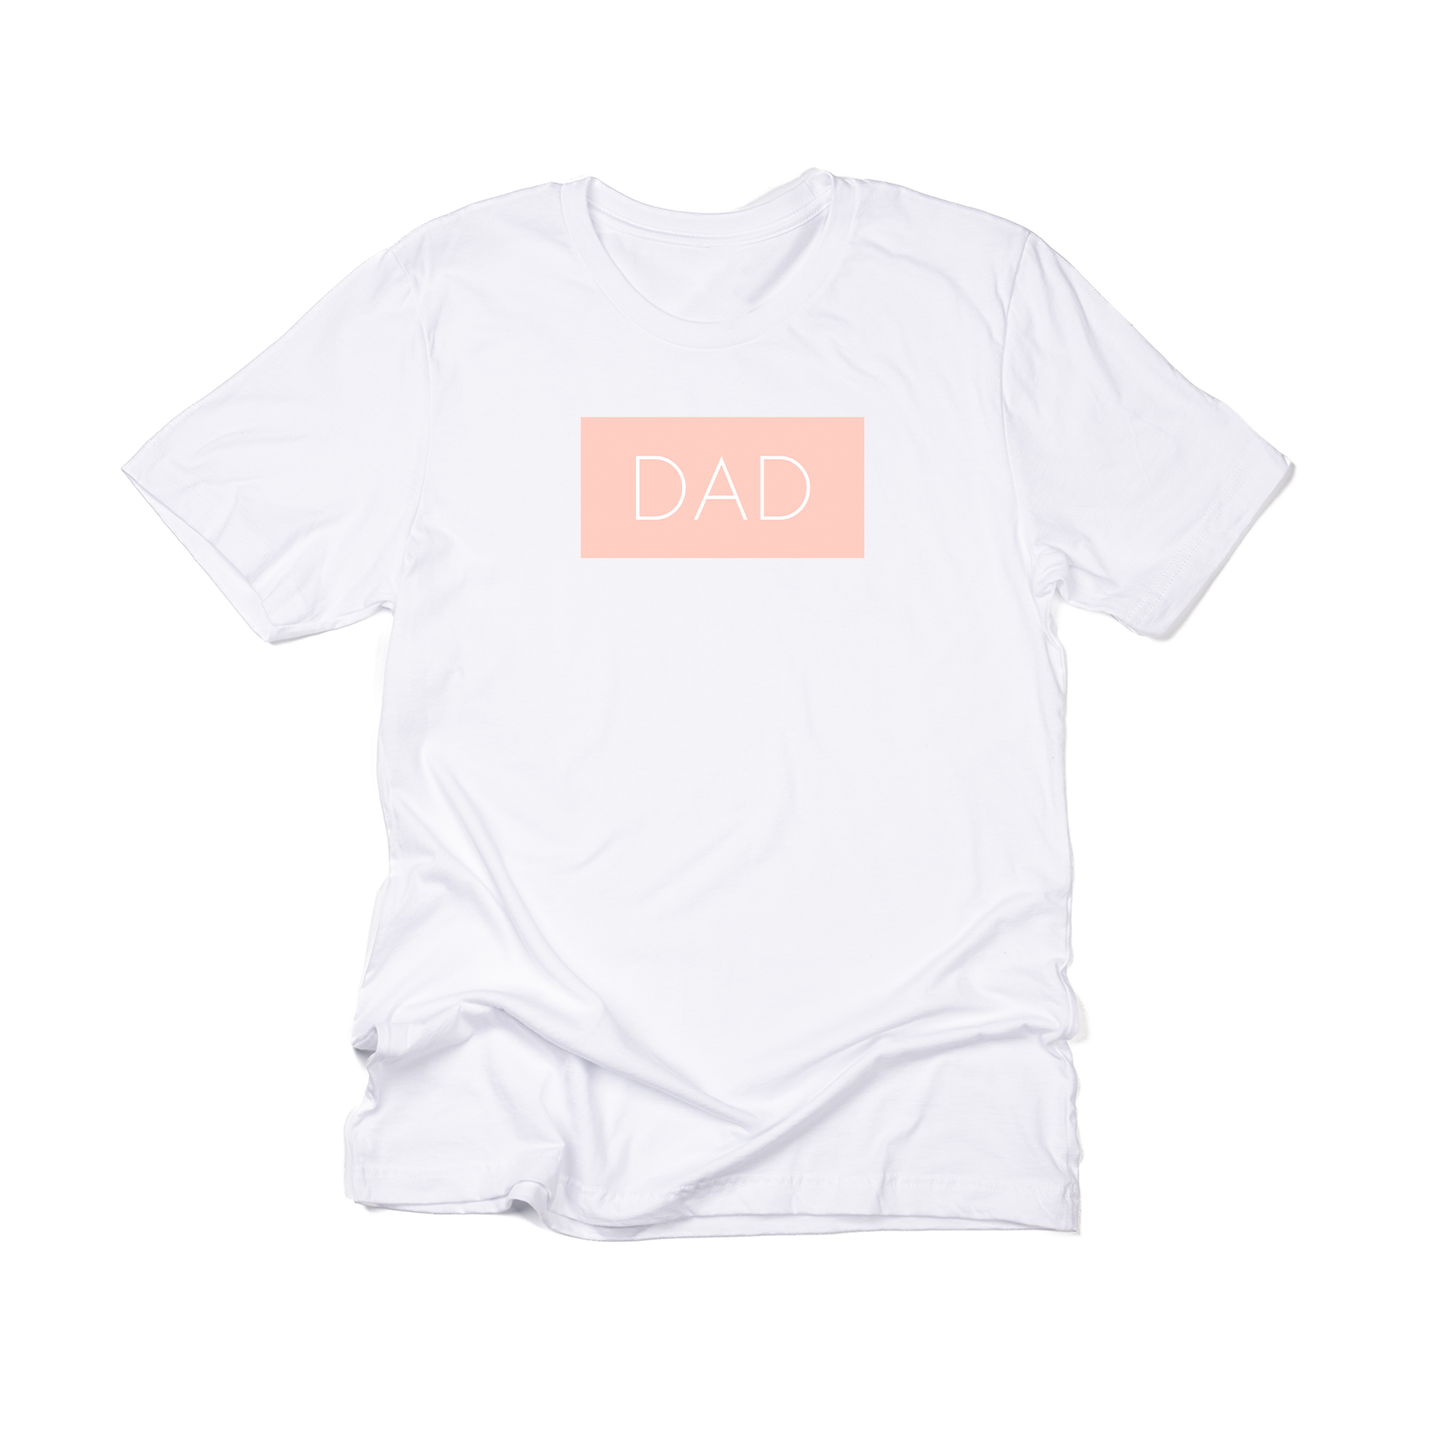 Dad (Boxed Collection, Ballerina Pink Box/White Text, Across Front) - Tee (White)